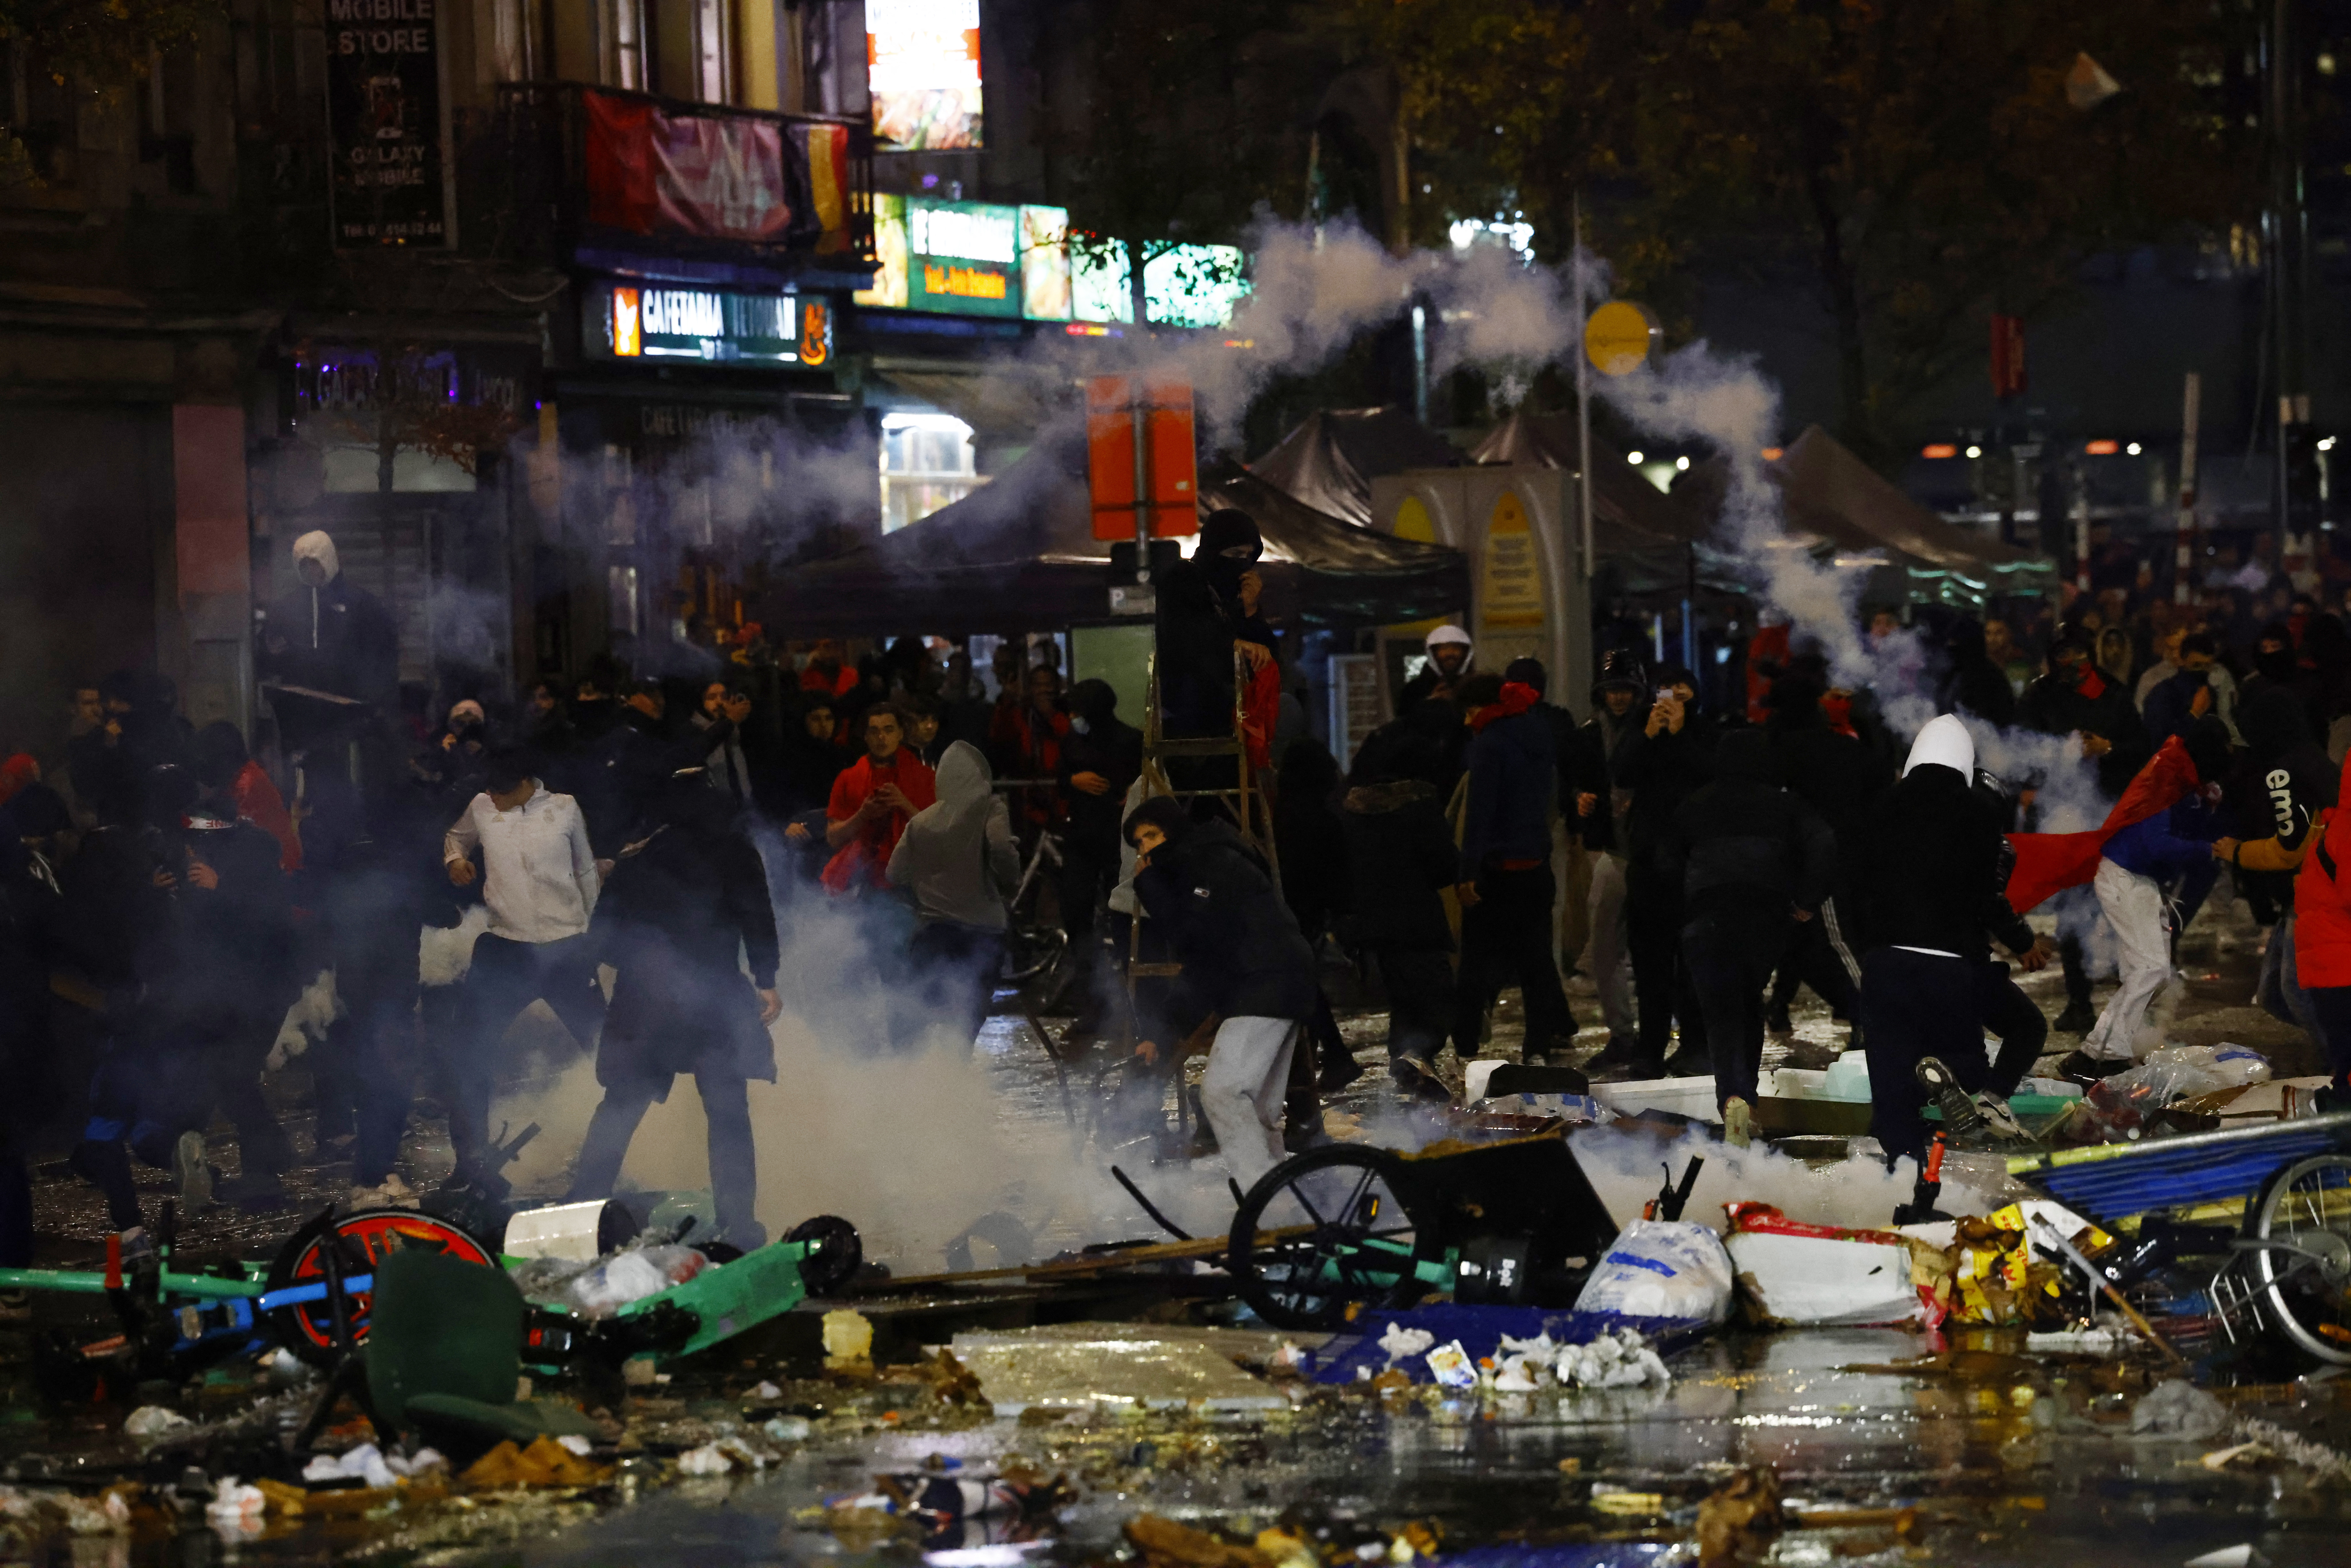 Moroccan supporters clash with police on the streets of Brussels (REUTERS/Yves Herman)